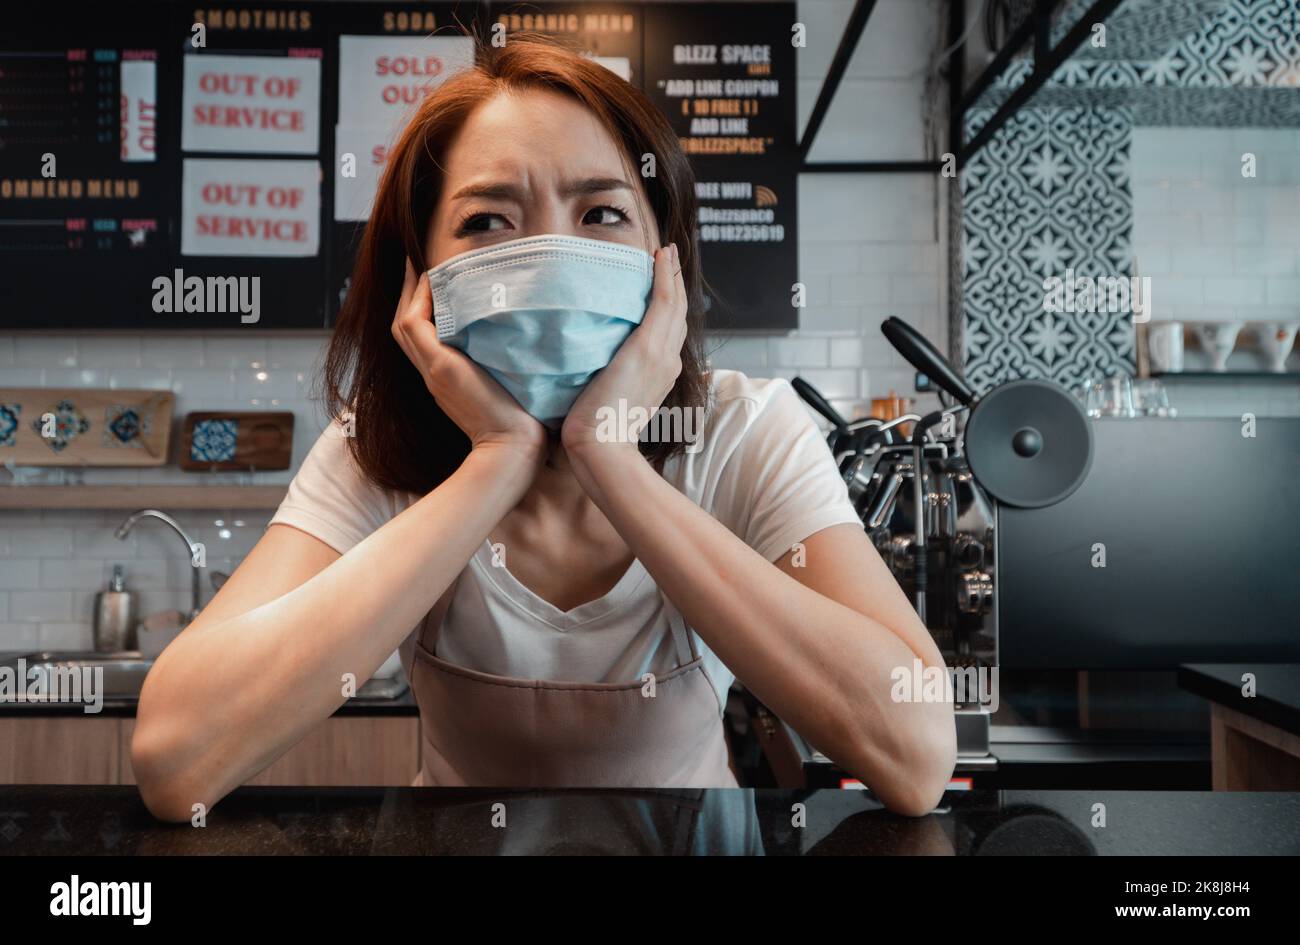 Asian woman coffee shop business owner Stressed and disappointed from The effects of the coronavirus pandemic resulting in business losses Stock Photo